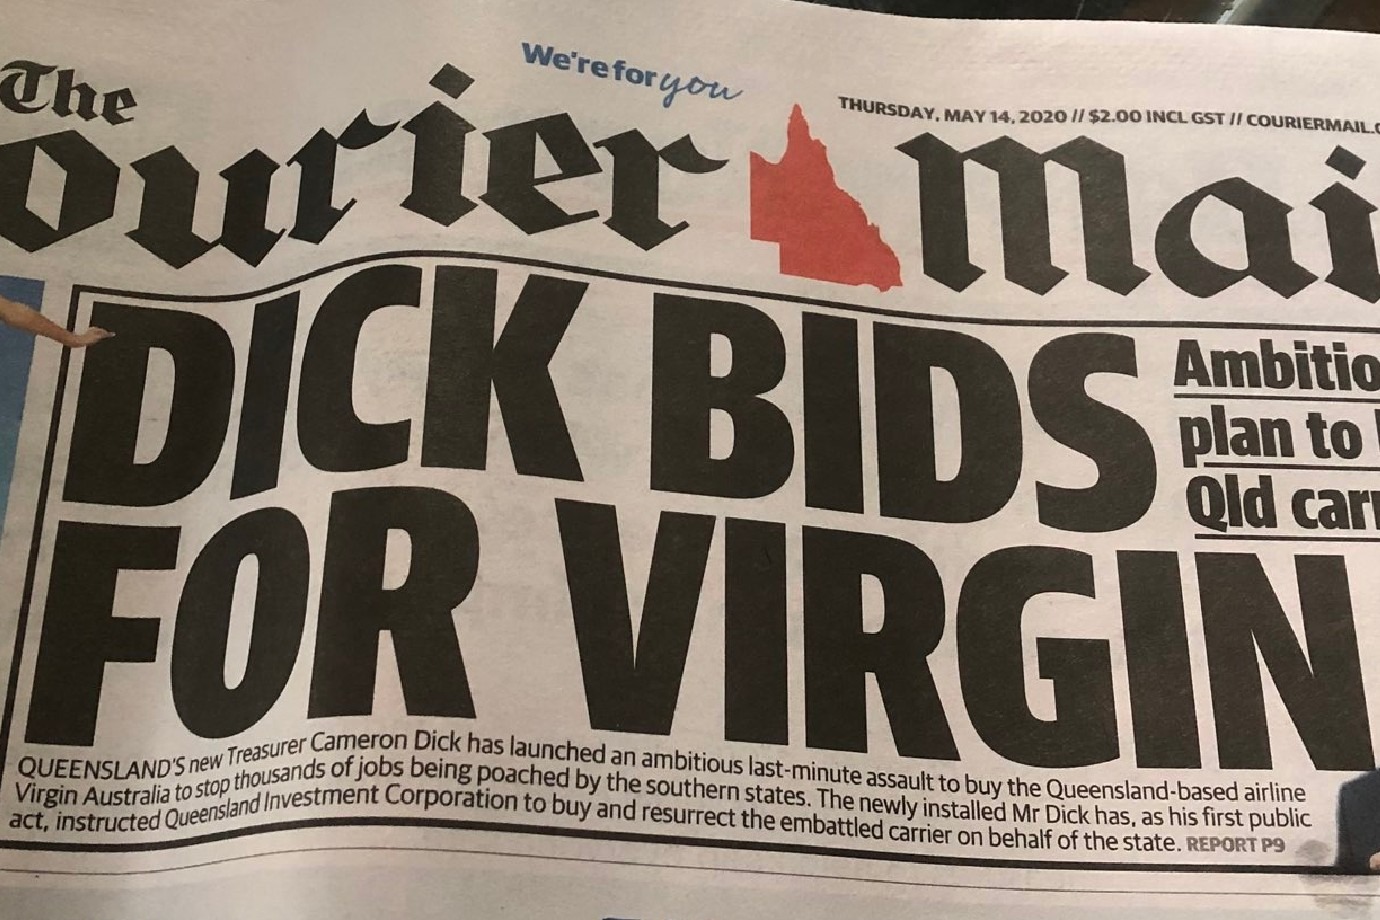 The Courier Mail Front Page Surely Cannot Be Real